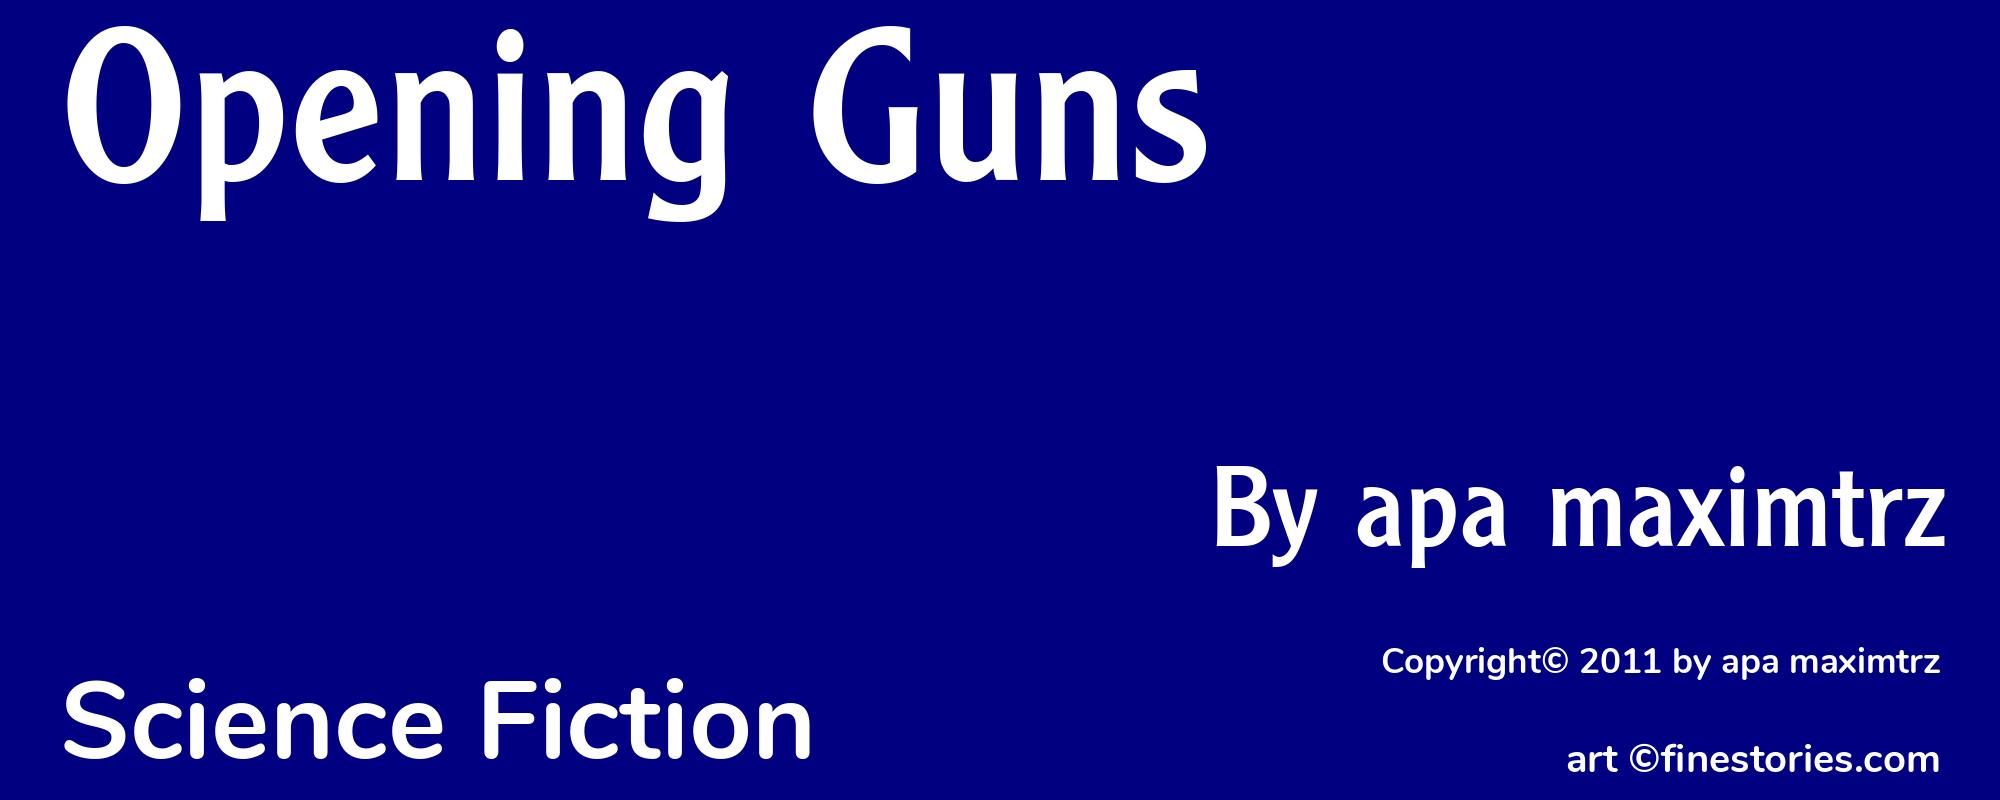 Opening Guns - Cover